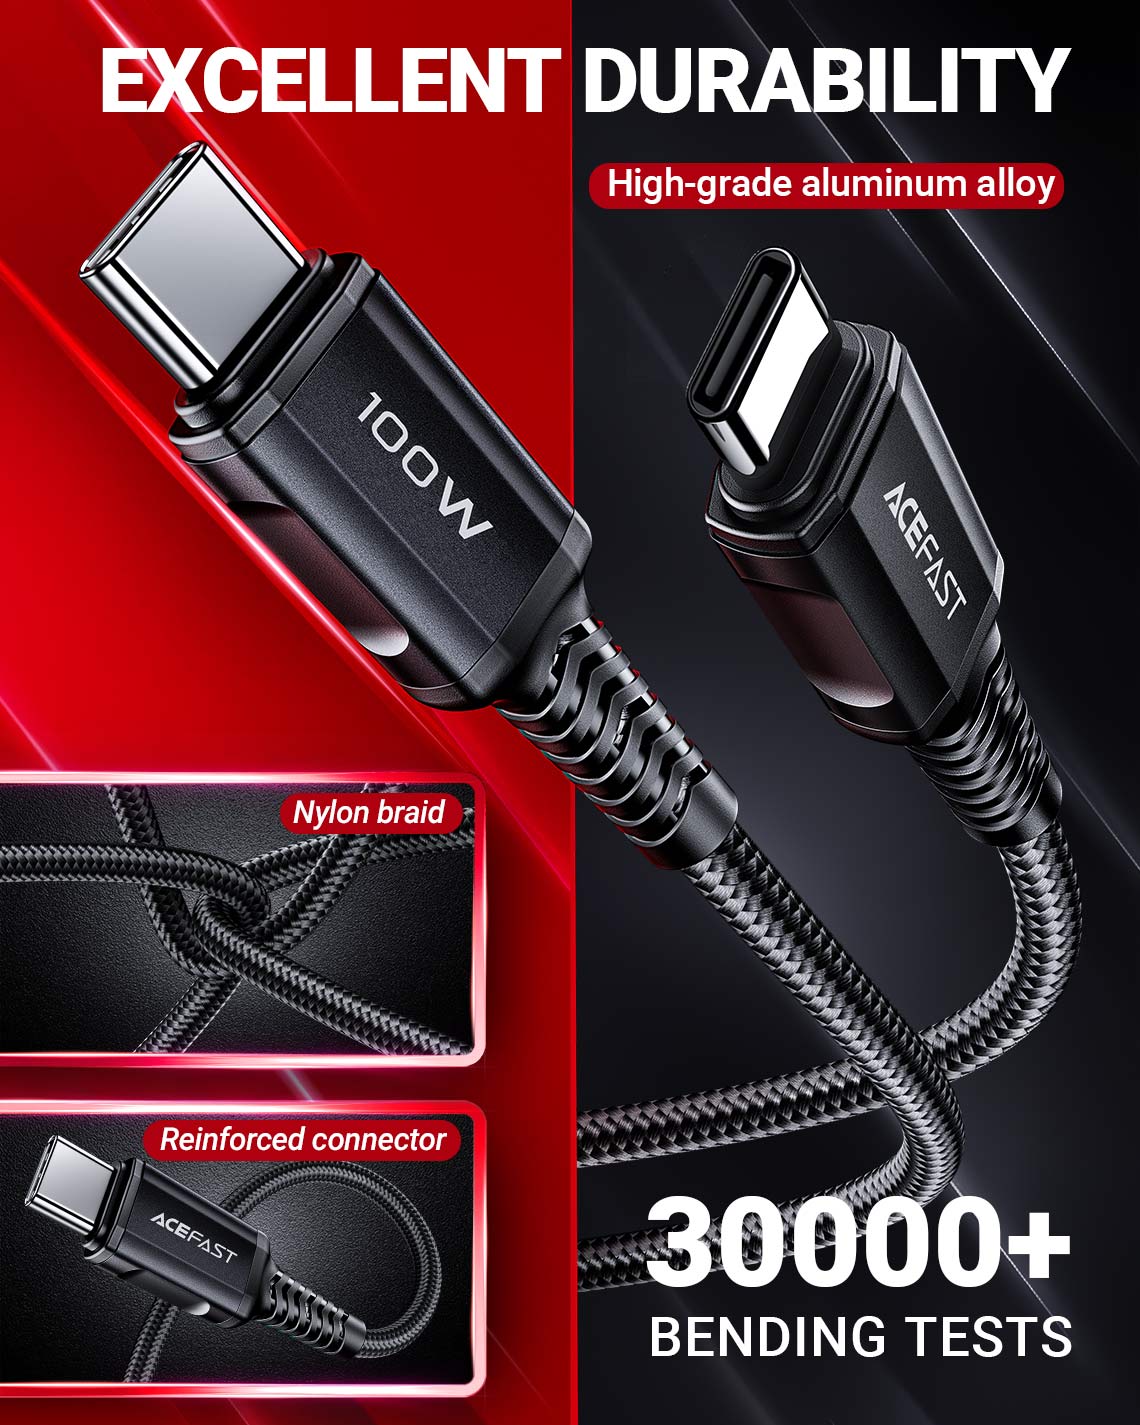 acefast-c4-03-usbc-to-usbc-100w-charging-data-cable-excellent-durability